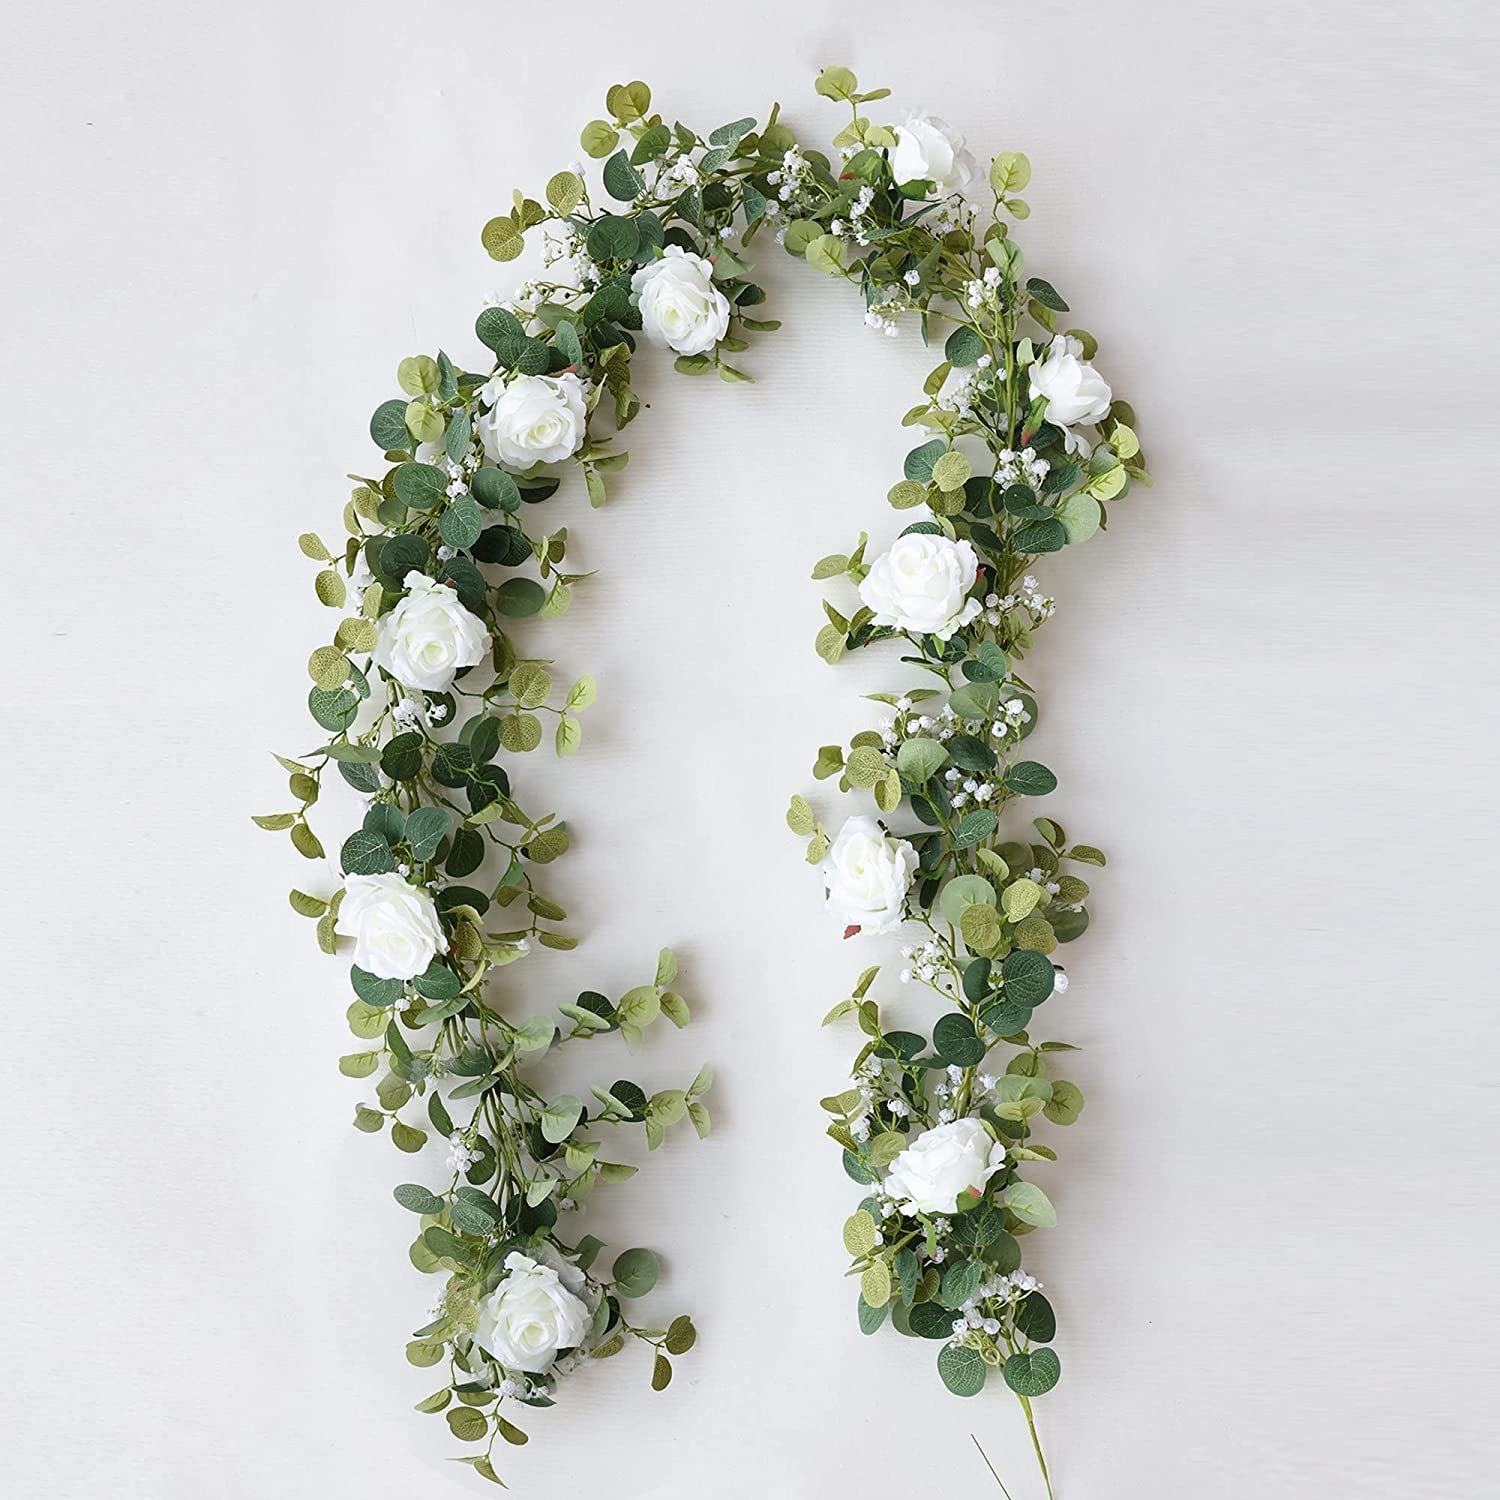 Anna'S Whimsy 5.91FT Artificial Eucalyptus Garland with Flowers, Fake Rose Gypsophila Garland, Faux Floral Garland Greenery Garland for Wedding Spring Home Party Craft Art Table Runner Decor